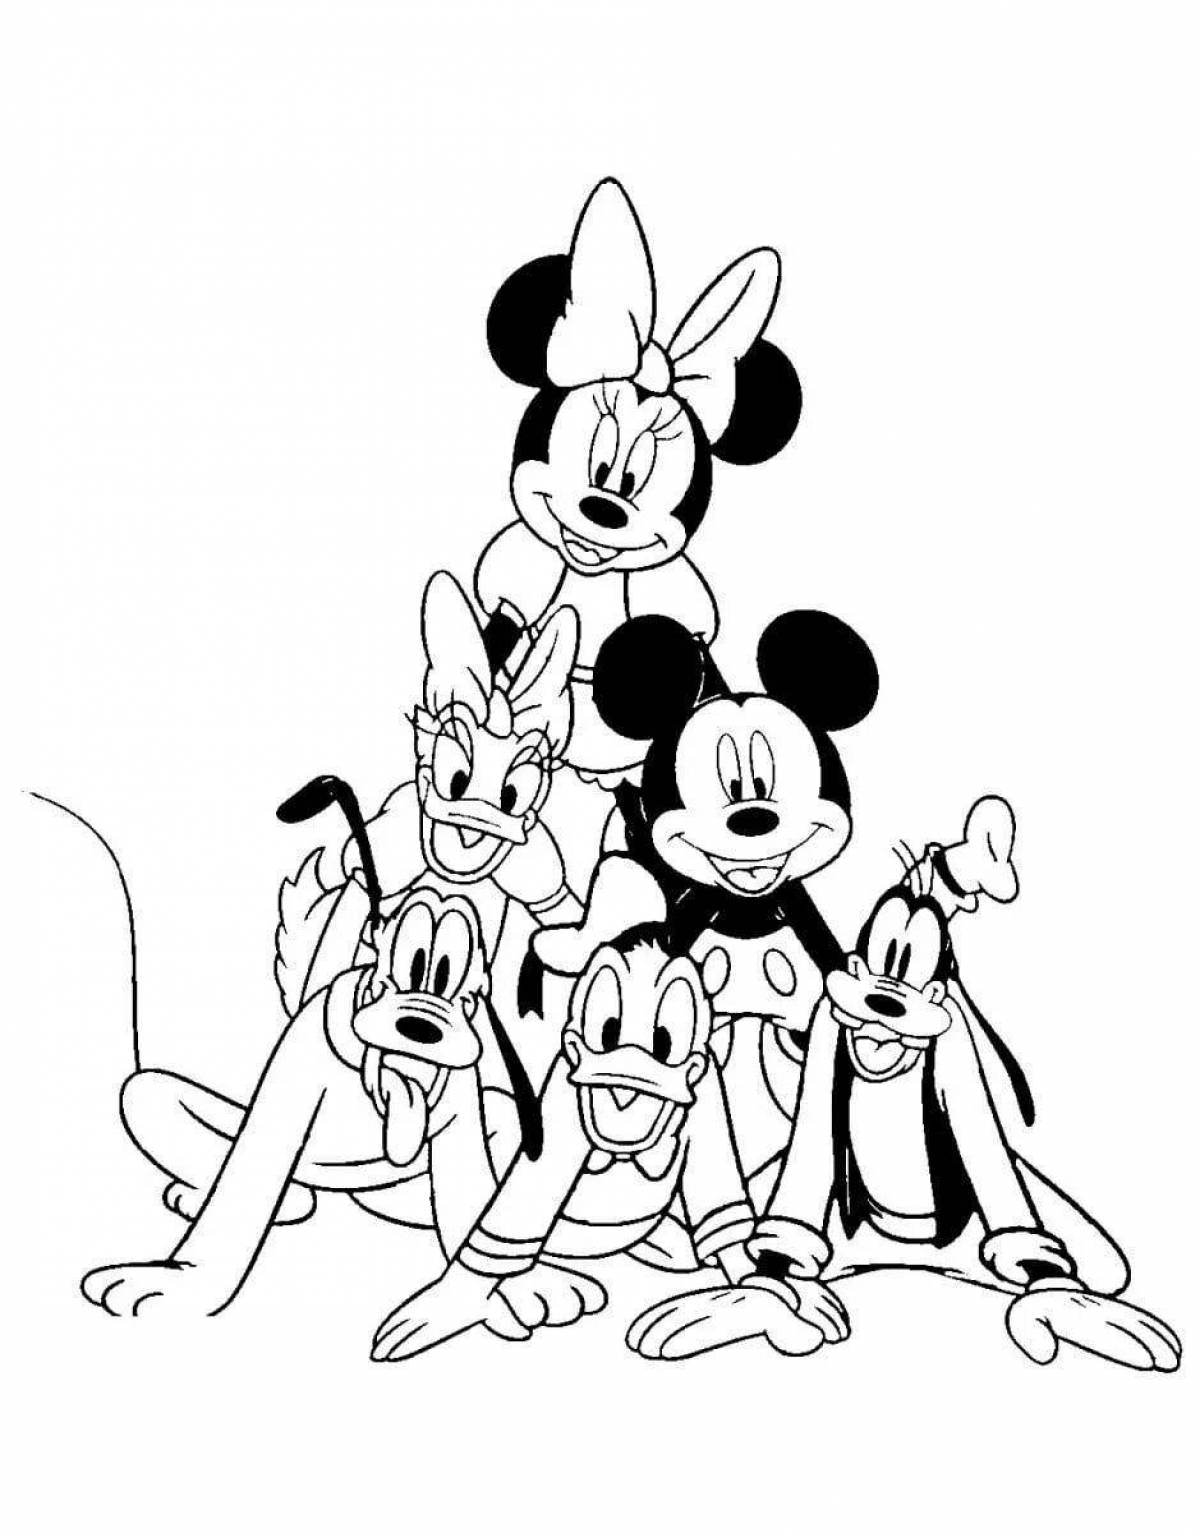 Glittering Huey, Dewey and Louie coloring page